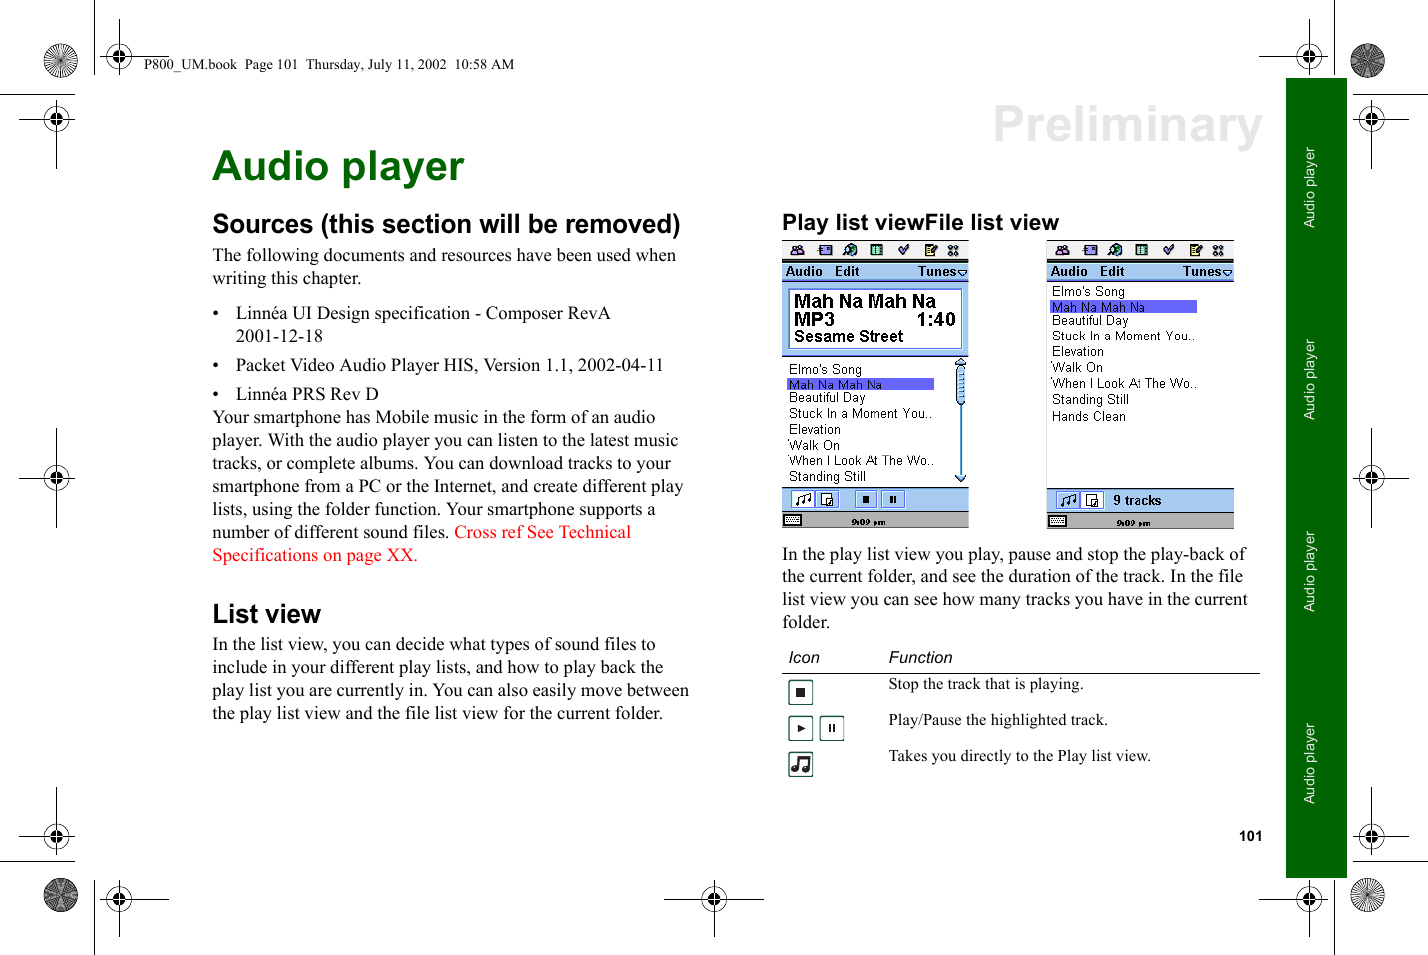 101Audio playerAudio playerAudio playerAudio playerPreliminaryAudio playerSources (this section will be removed)The following documents and resources have been used when writing this chapter.• Linnéa UI Design specification - Composer RevA 2001-12-18• Packet Video Audio Player HIS, Version 1.1, 2002-04-11• Linnéa PRS Rev DYour smartphone has Mobile music in the form of an audio player. With the audio player you can listen to the latest music tracks, or complete albums. You can download tracks to your smartphone from a PC or the Internet, and create different play lists, using the folder function. Your smartphone supports a number of different sound files. Cross ref See Technical Specifications on page XX.List viewIn the list view, you can decide what types of sound files to include in your different play lists, and how to play back the play list you are currently in. You can also easily move between the play list view and the file list view for the current folder.Play list viewFile list view In the play list view you play, pause and stop the play-back of the current folder, and see the duration of the track. In the file list view you can see how many tracks you have in the current folder.Icon FunctionStop the track that is playing. Play/Pause the highlighted track.Takes you directly to the Play list view.P800_UM.book  Page 101  Thursday, July 11, 2002  10:58 AM